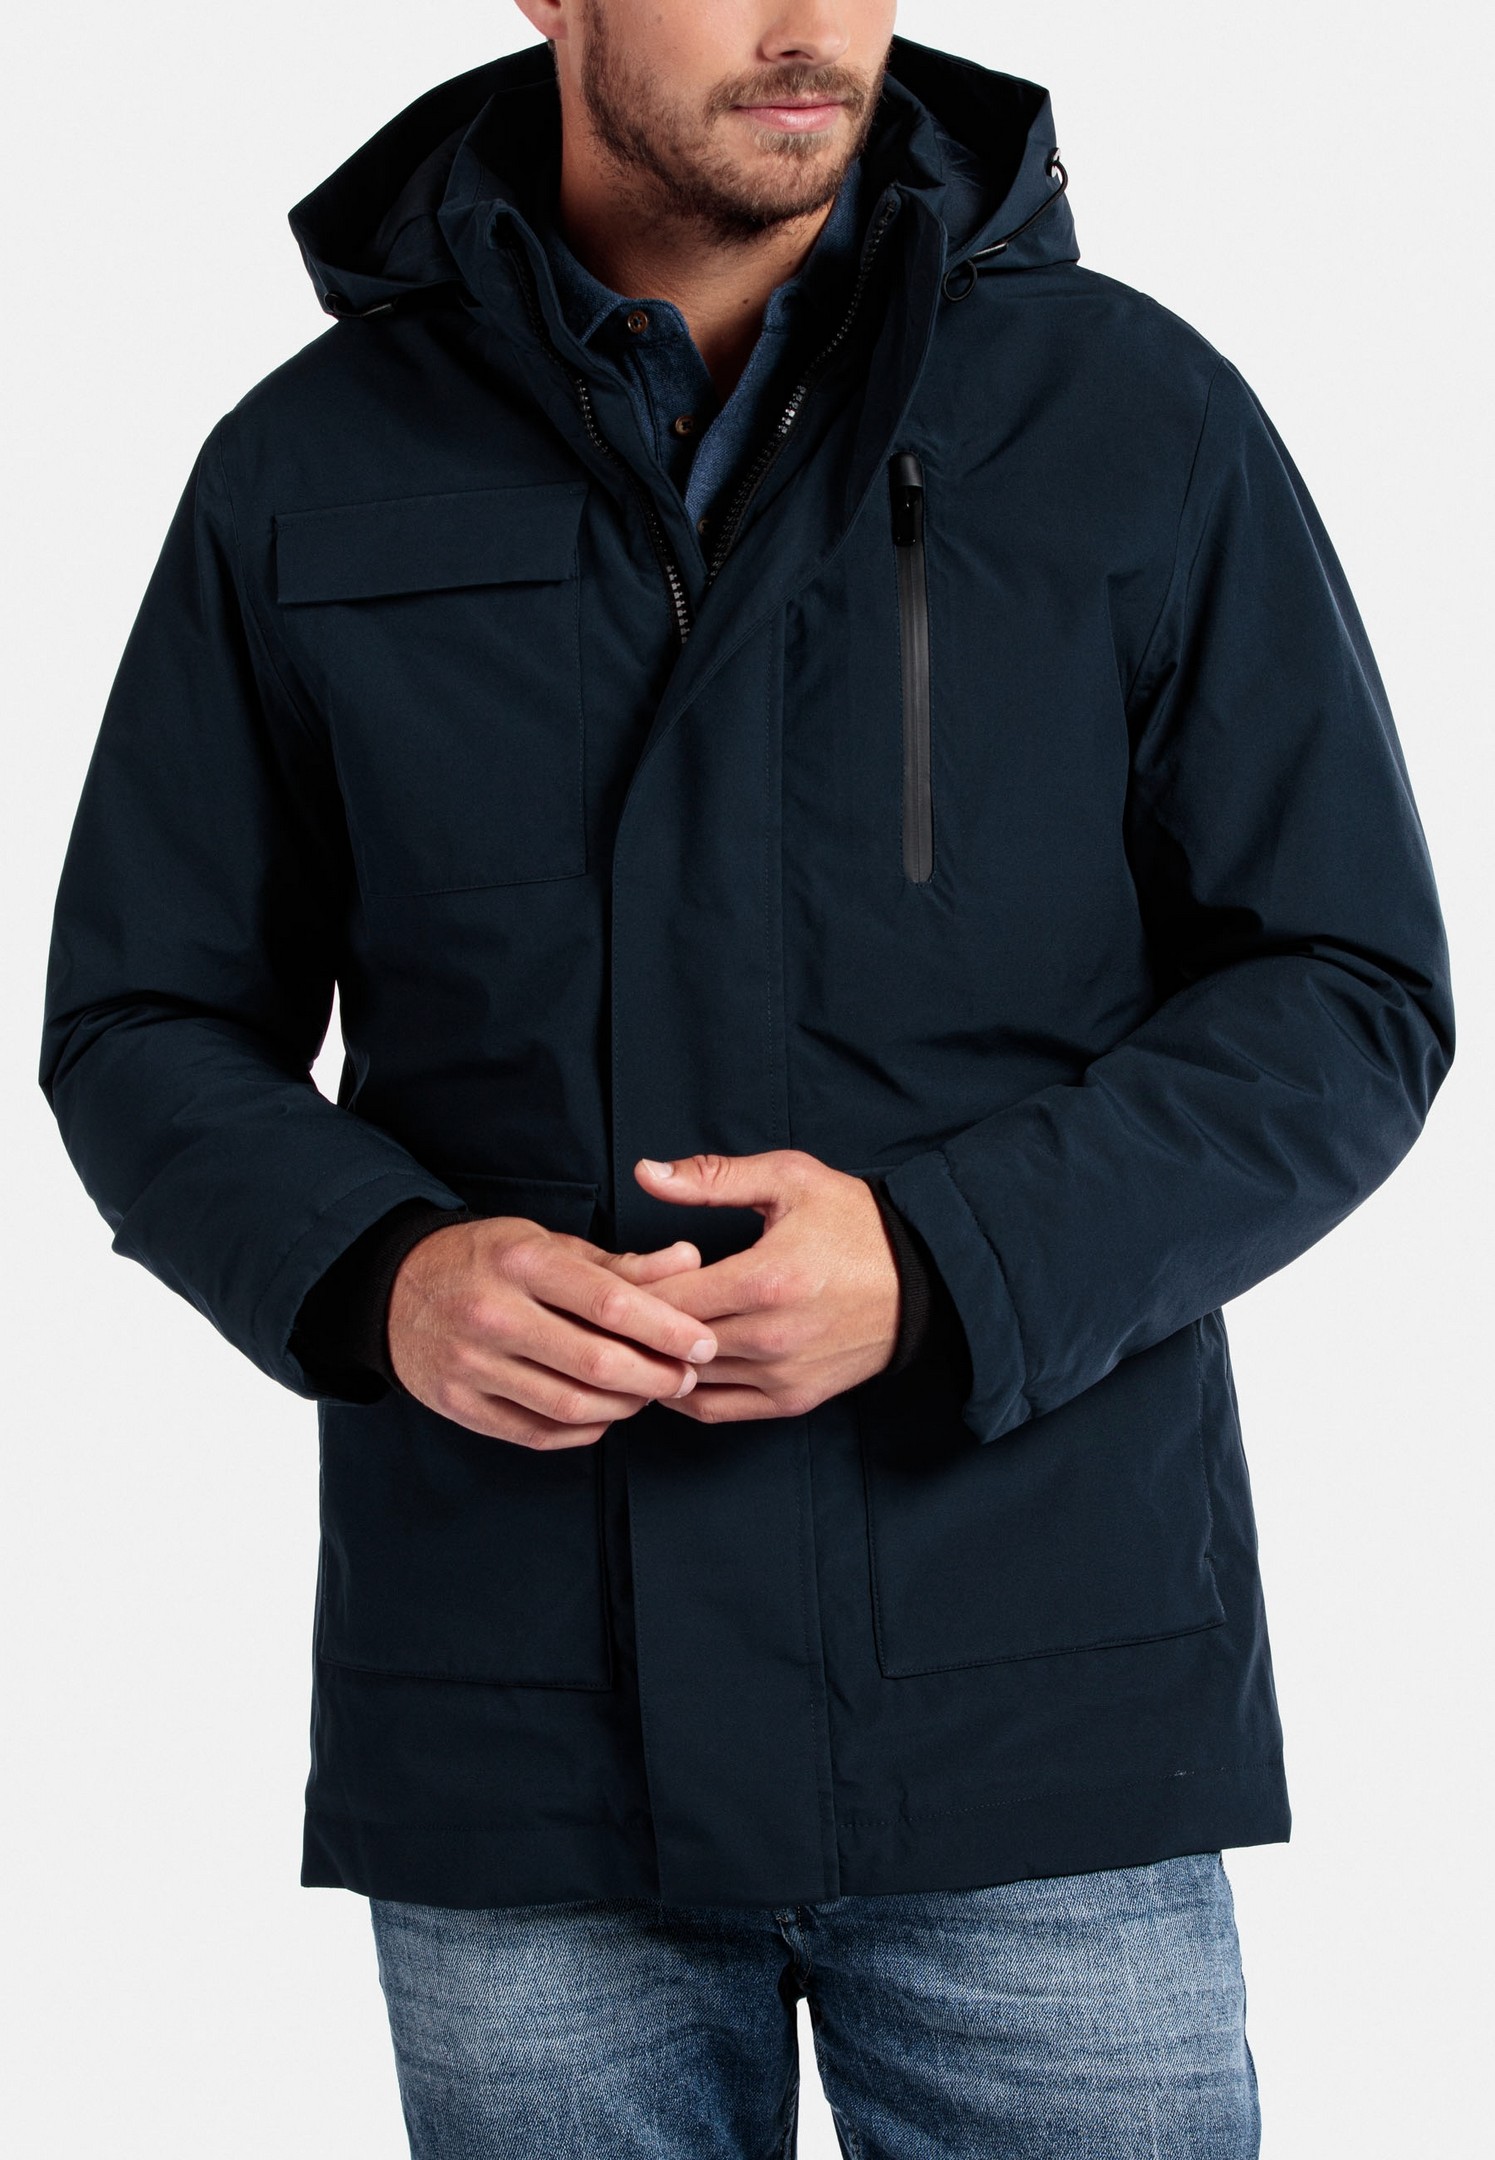 Giordano Jacket Removable Hood Men\'s Rozing Dark Fashion Windproof and Jan Water | Navy